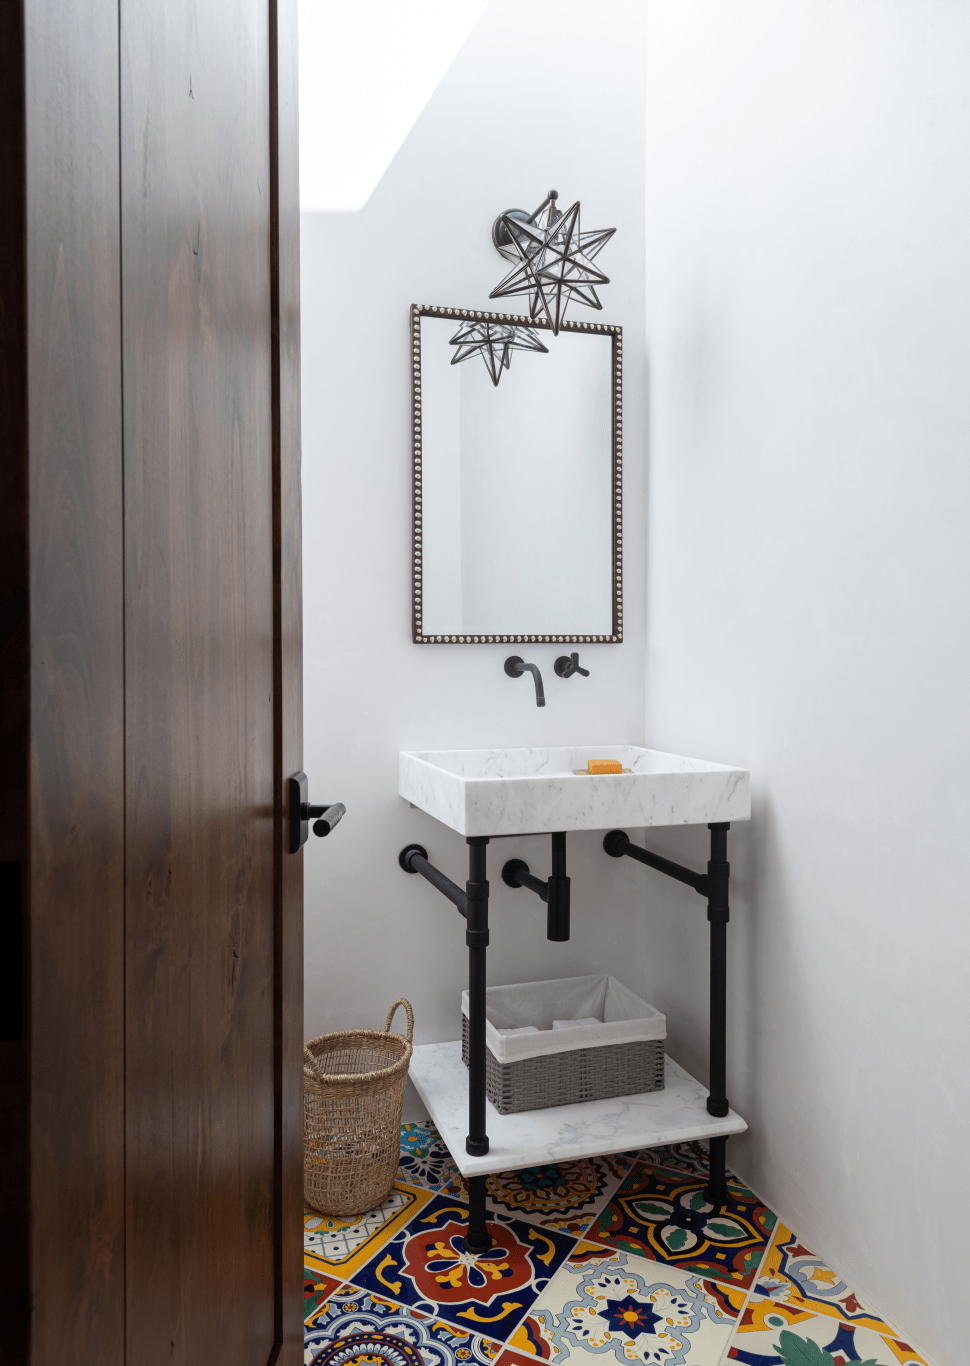 White walls, white & black sink contrasts with the colorful tile floor 